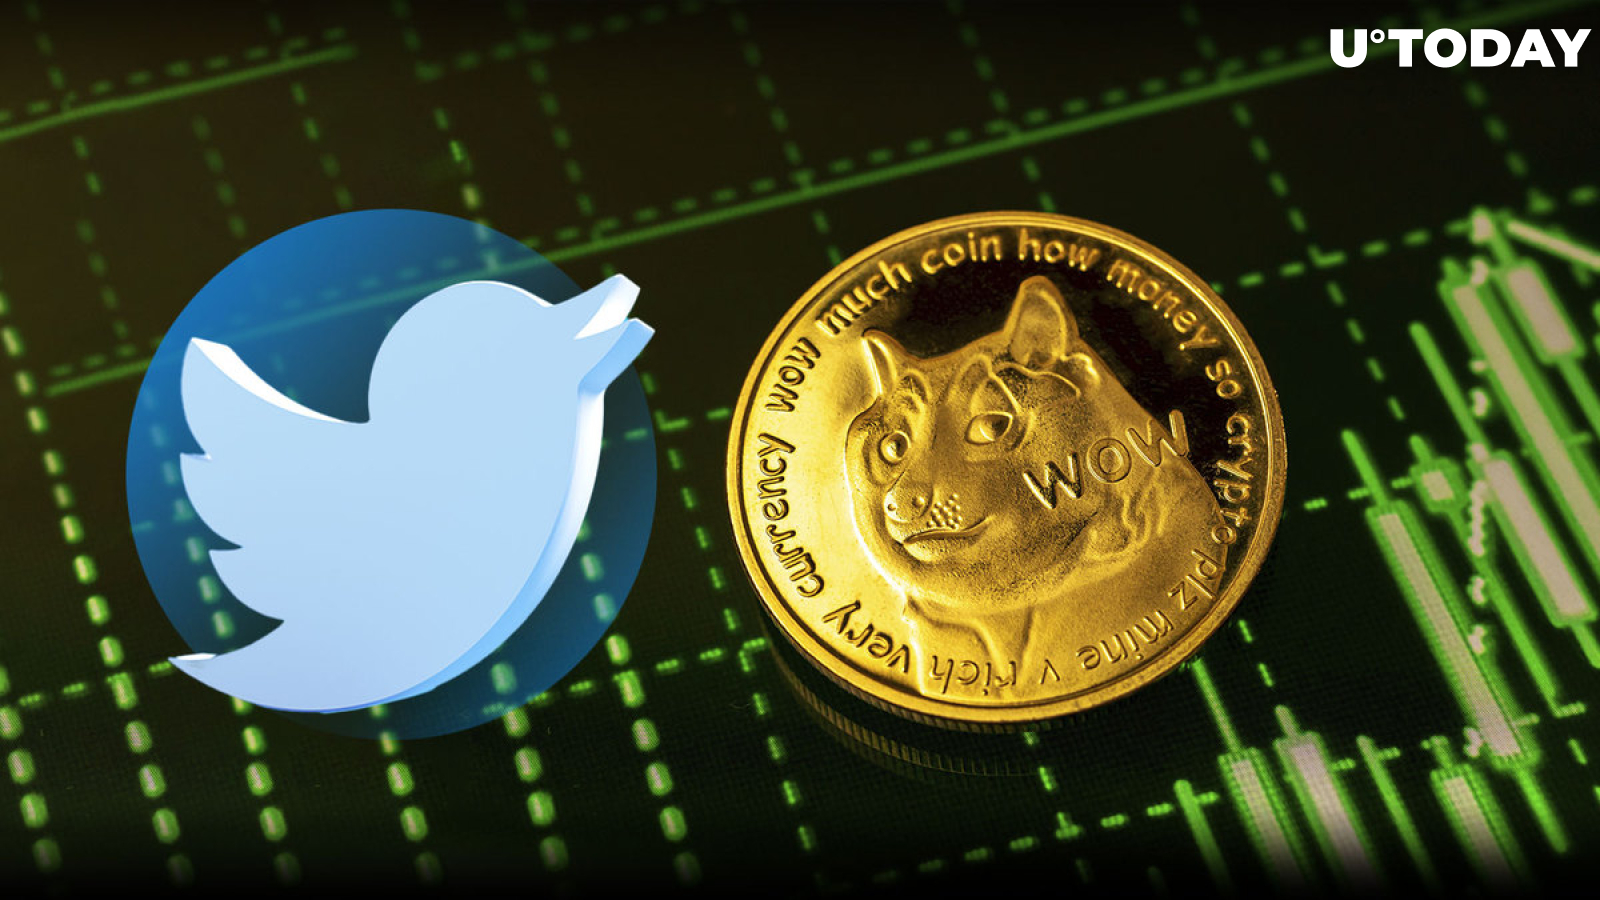 Dogecoin (DOGE) Price Skyrockets as Twitter Green Lights Crypto Trading